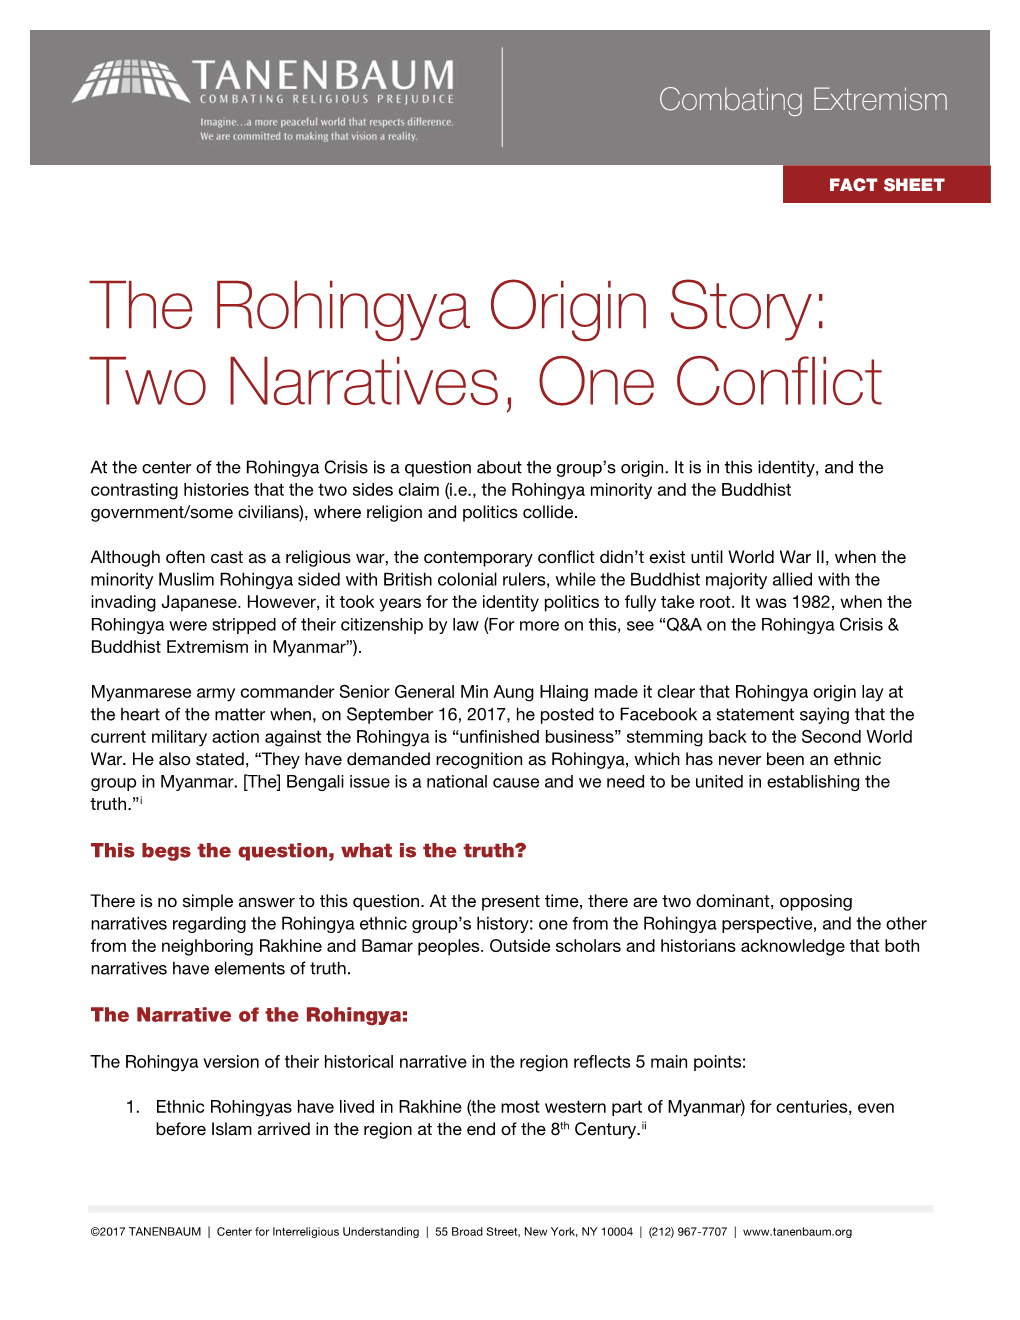 The Rohingya Origin Story: Two Narratives, One Conflict